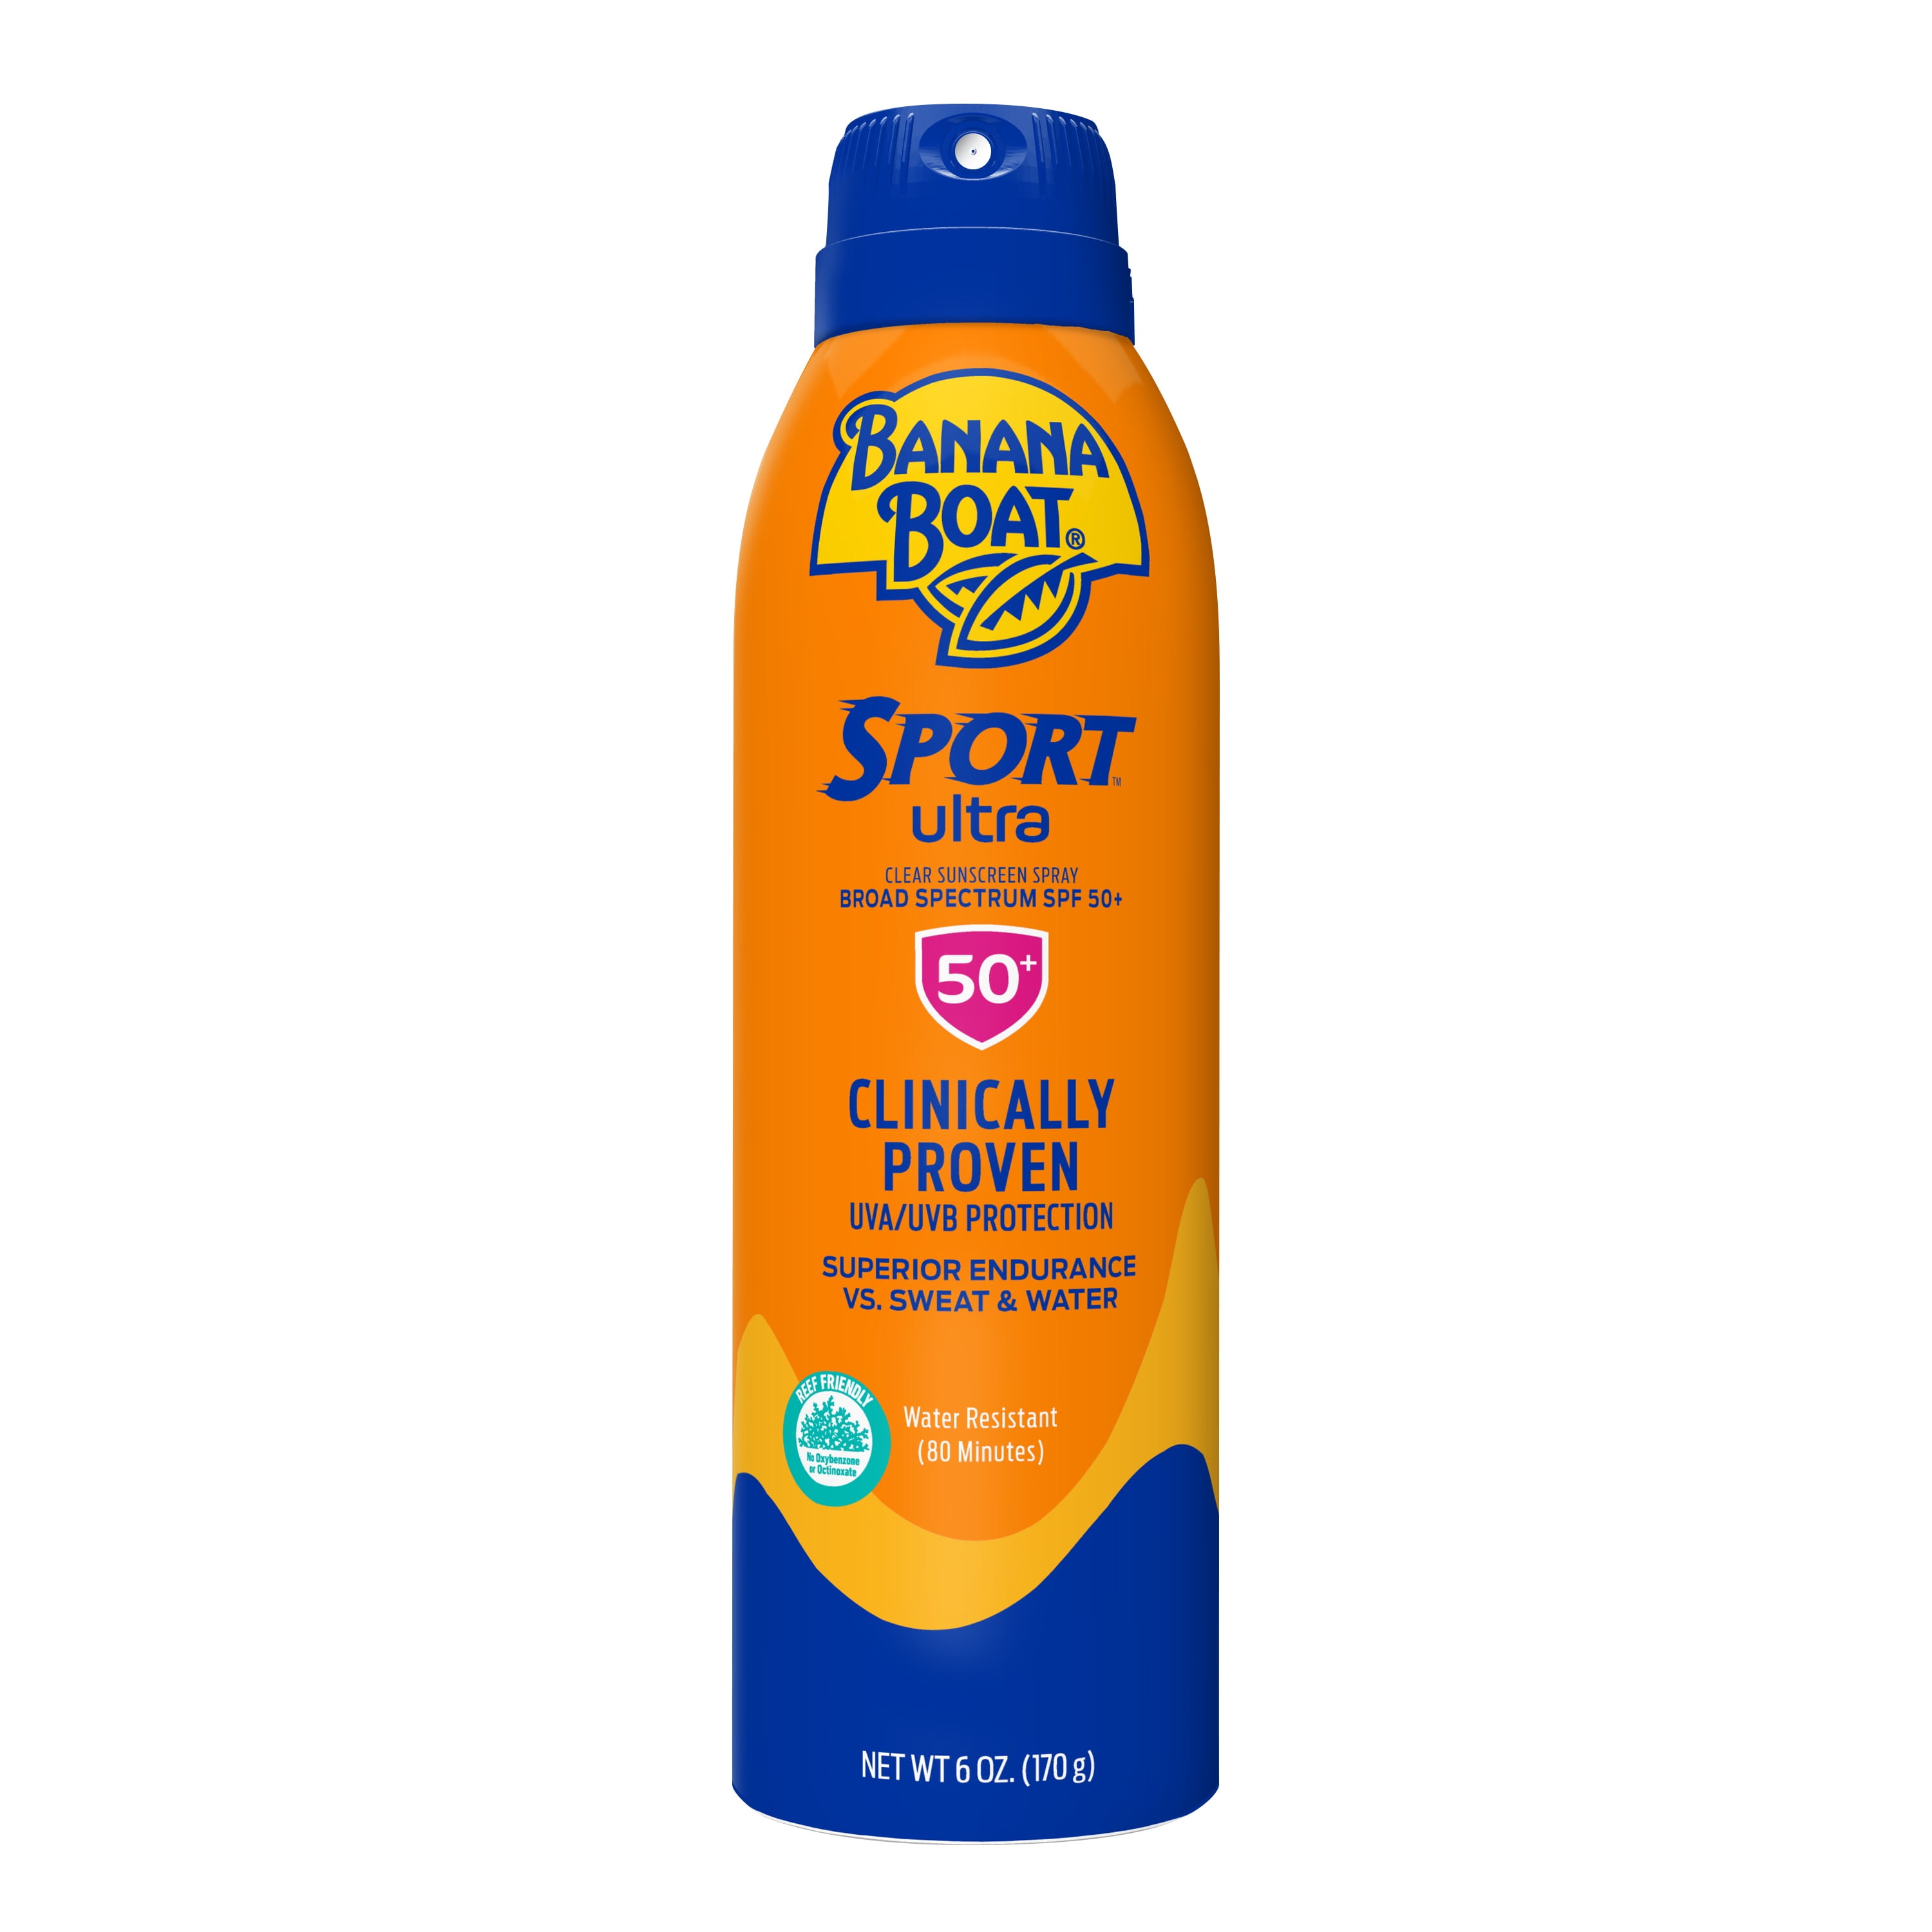 Banana Boat Sport Ultra Sunscreen Spray 6 Oz, 50 SPF, Water Resistant Sunblock (80 Minutes), Superior Endurance VS Sweat And Water